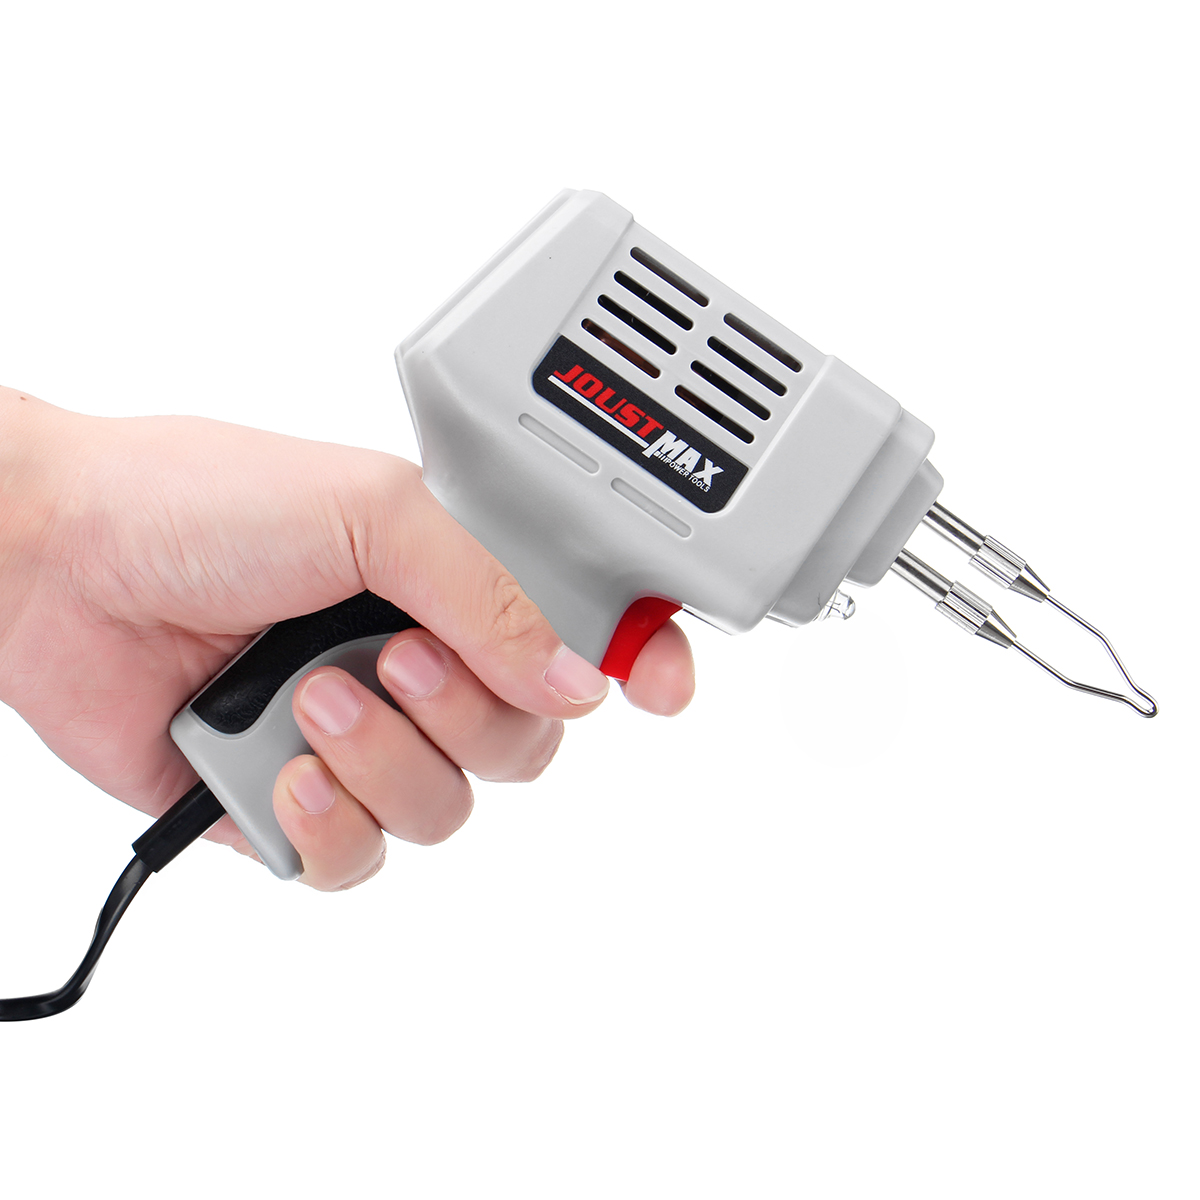 100W-220V-to-240V-Electrical-Soldering-Iron-Fast-Electric-Welding-Solder-Tool-EU-Plug-1393550-9